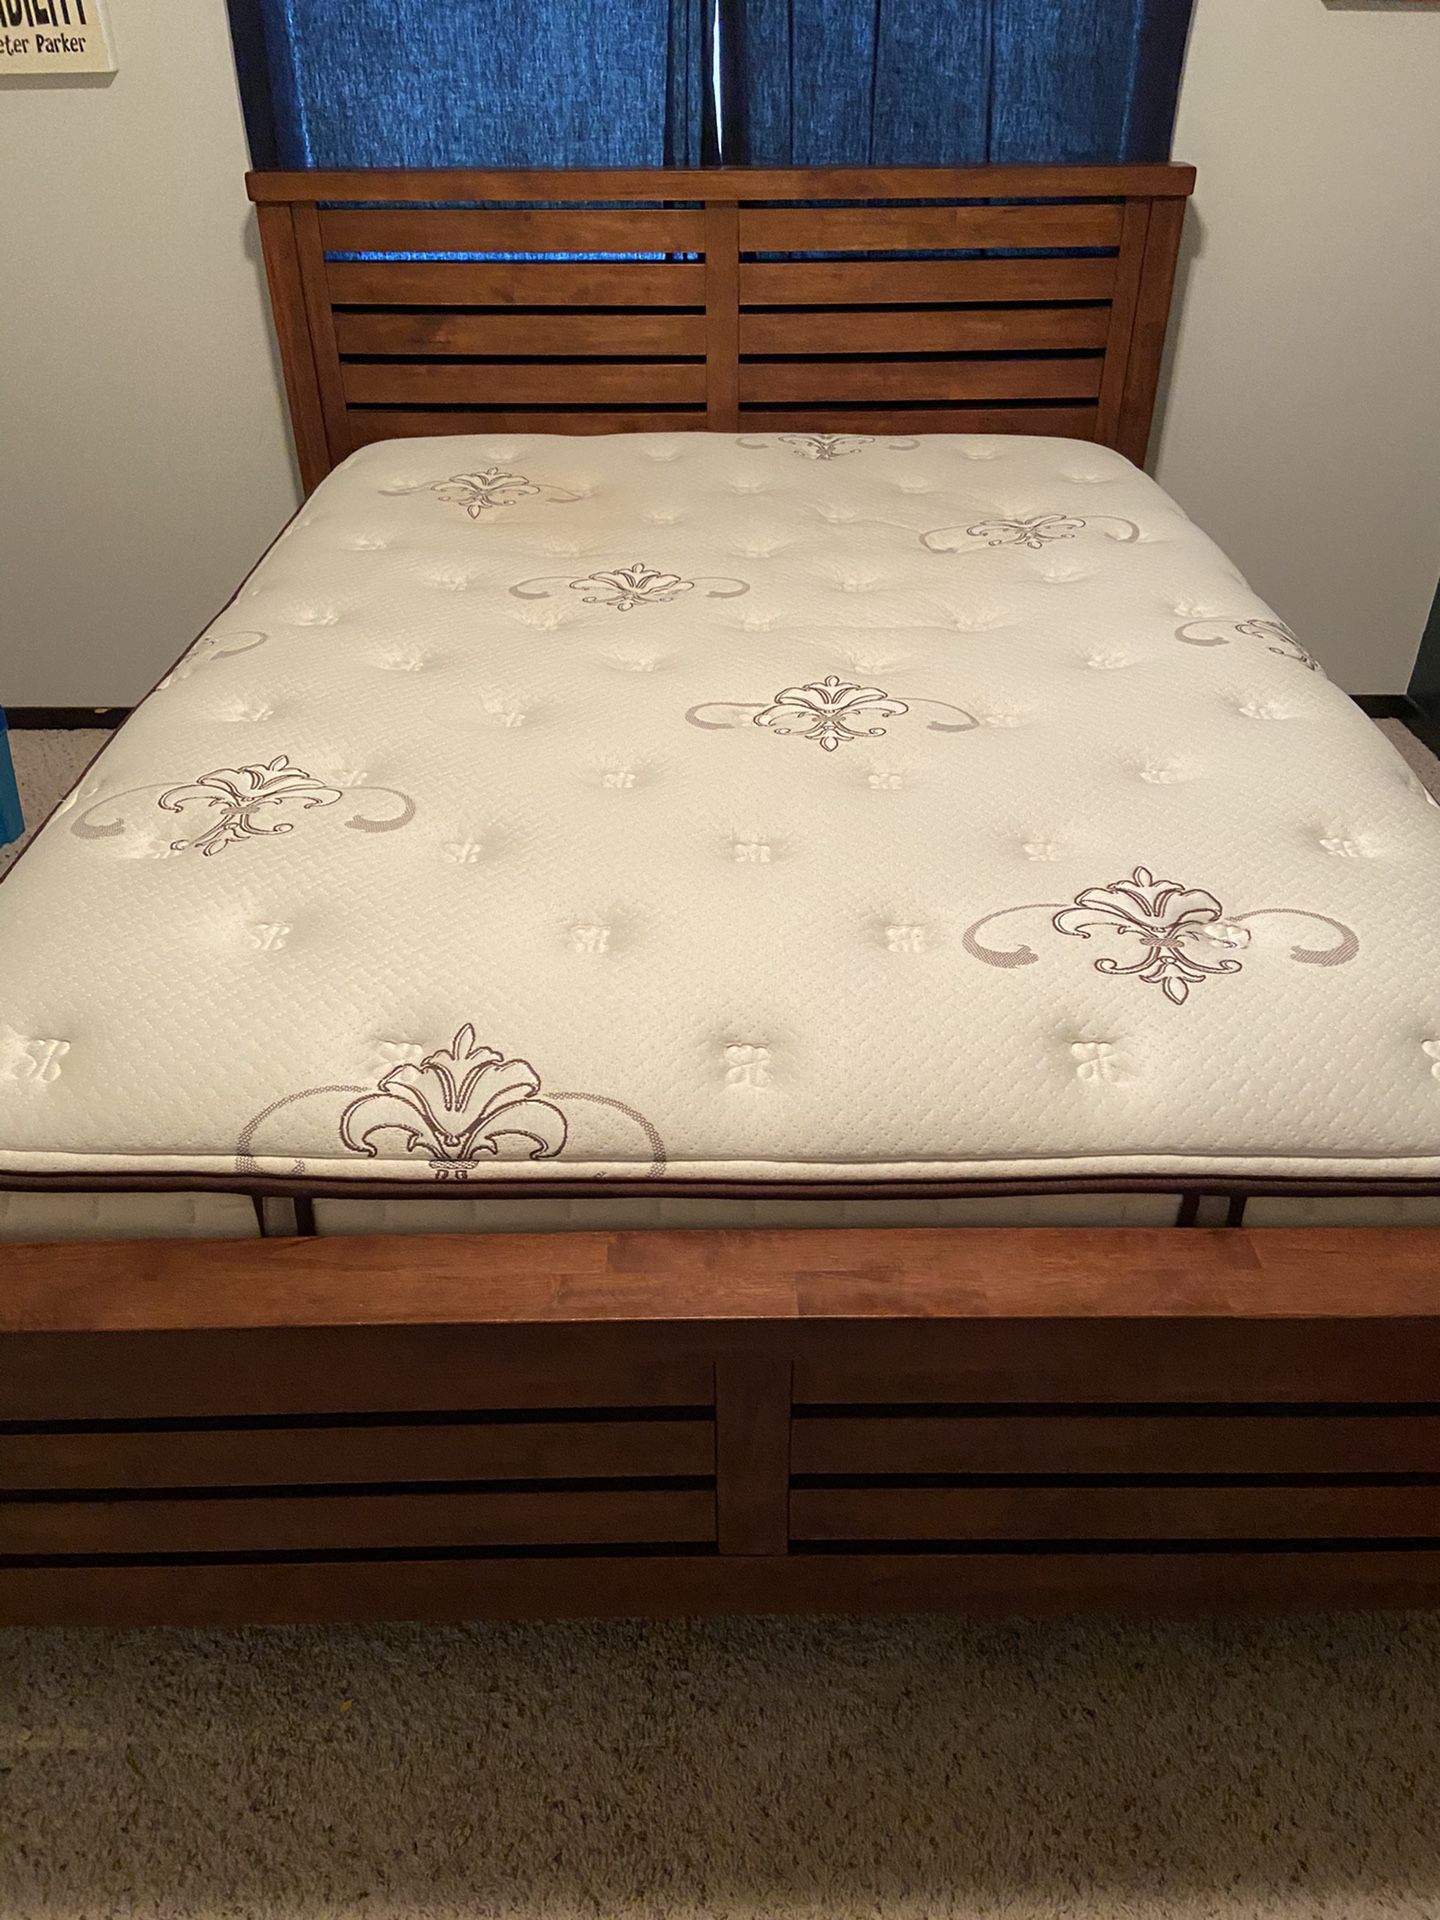 Bed frame and Queen size mattress